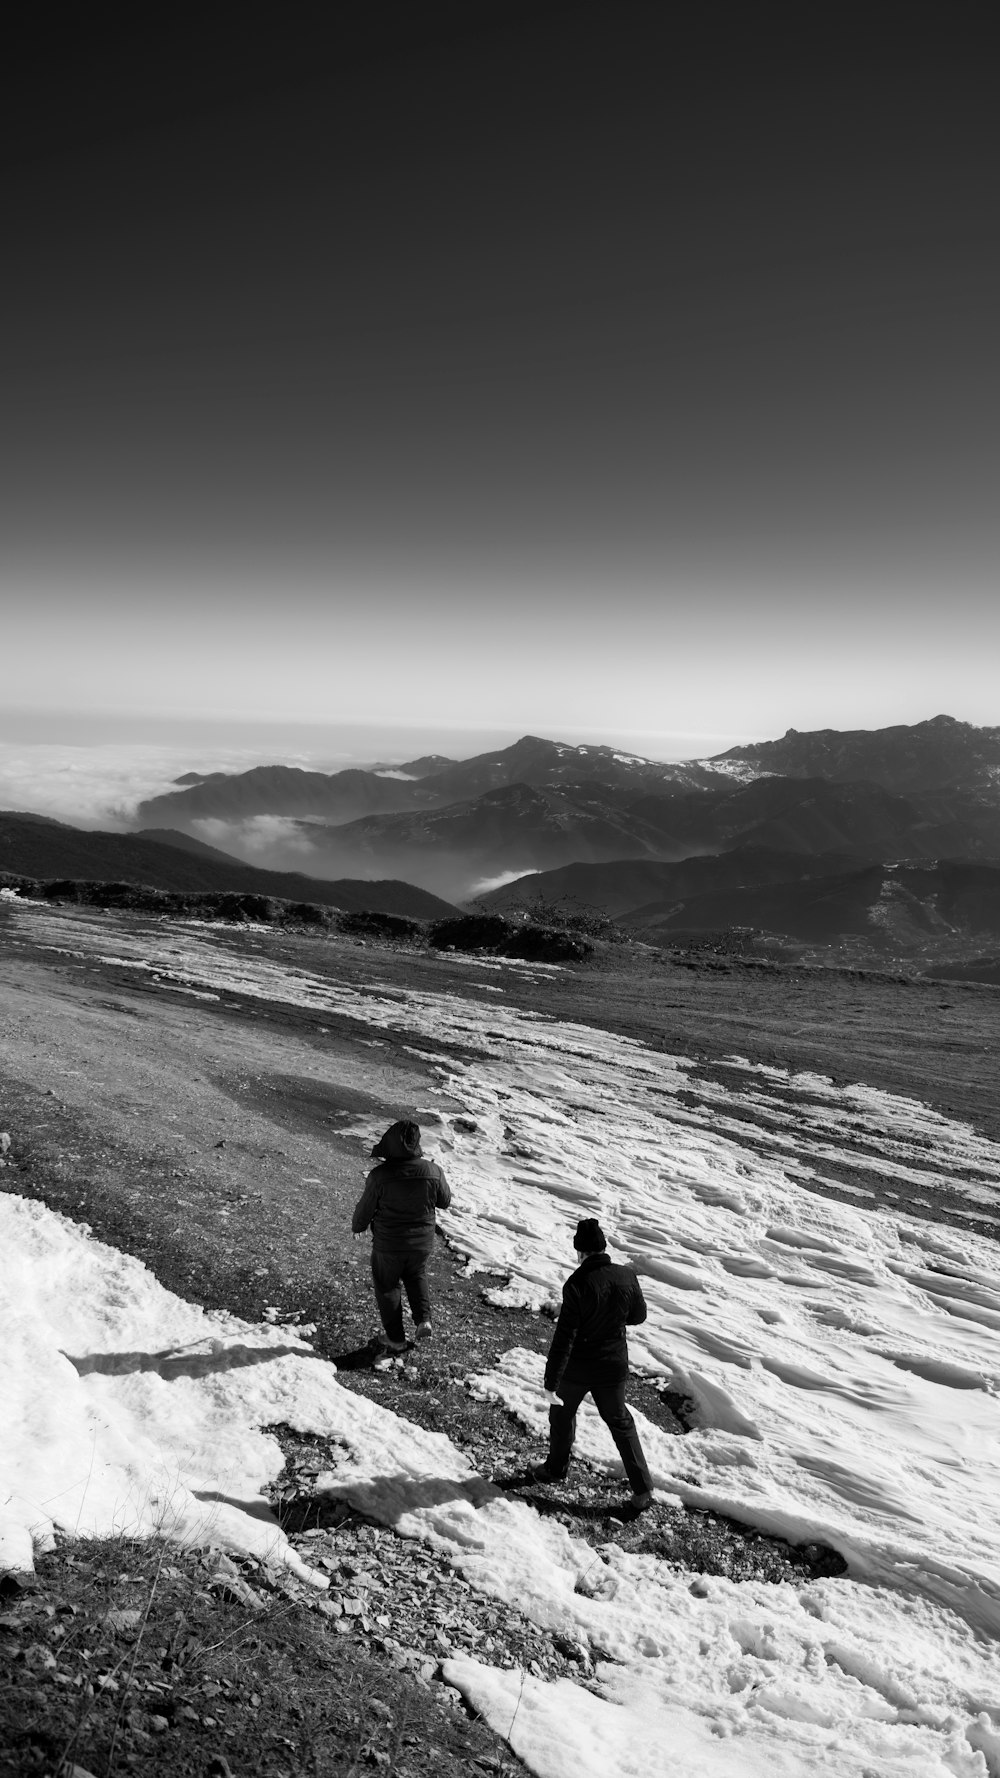 grayscale photo of 2 person walking on snow covered ground